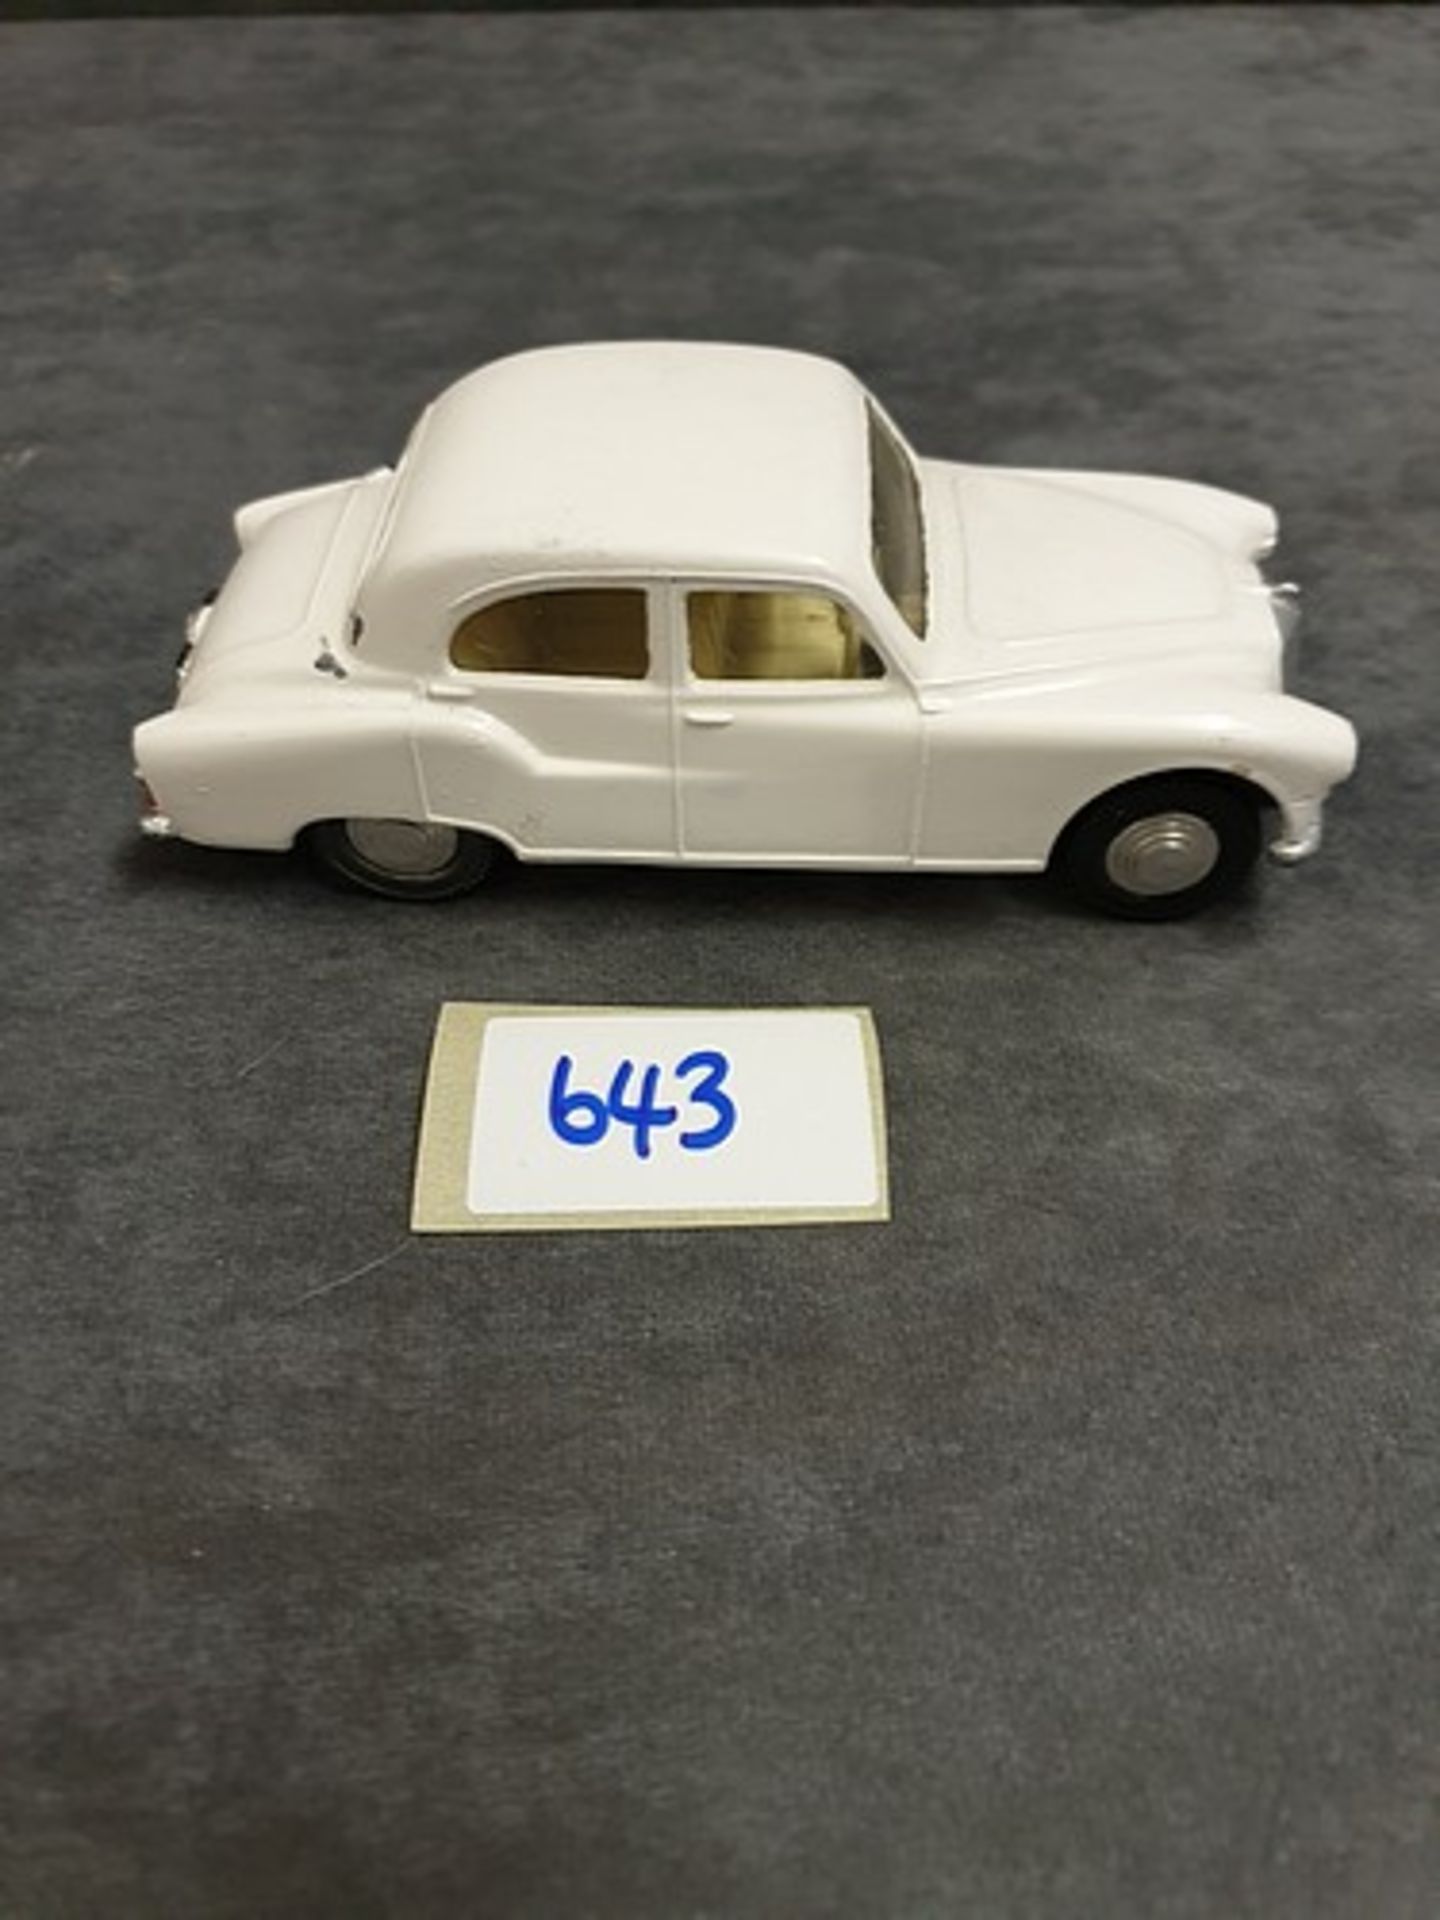 Spot-On By Tri-Ang Models Diecast #101 Armstrong Siddeley Sapphire In White And Cream Interior Model